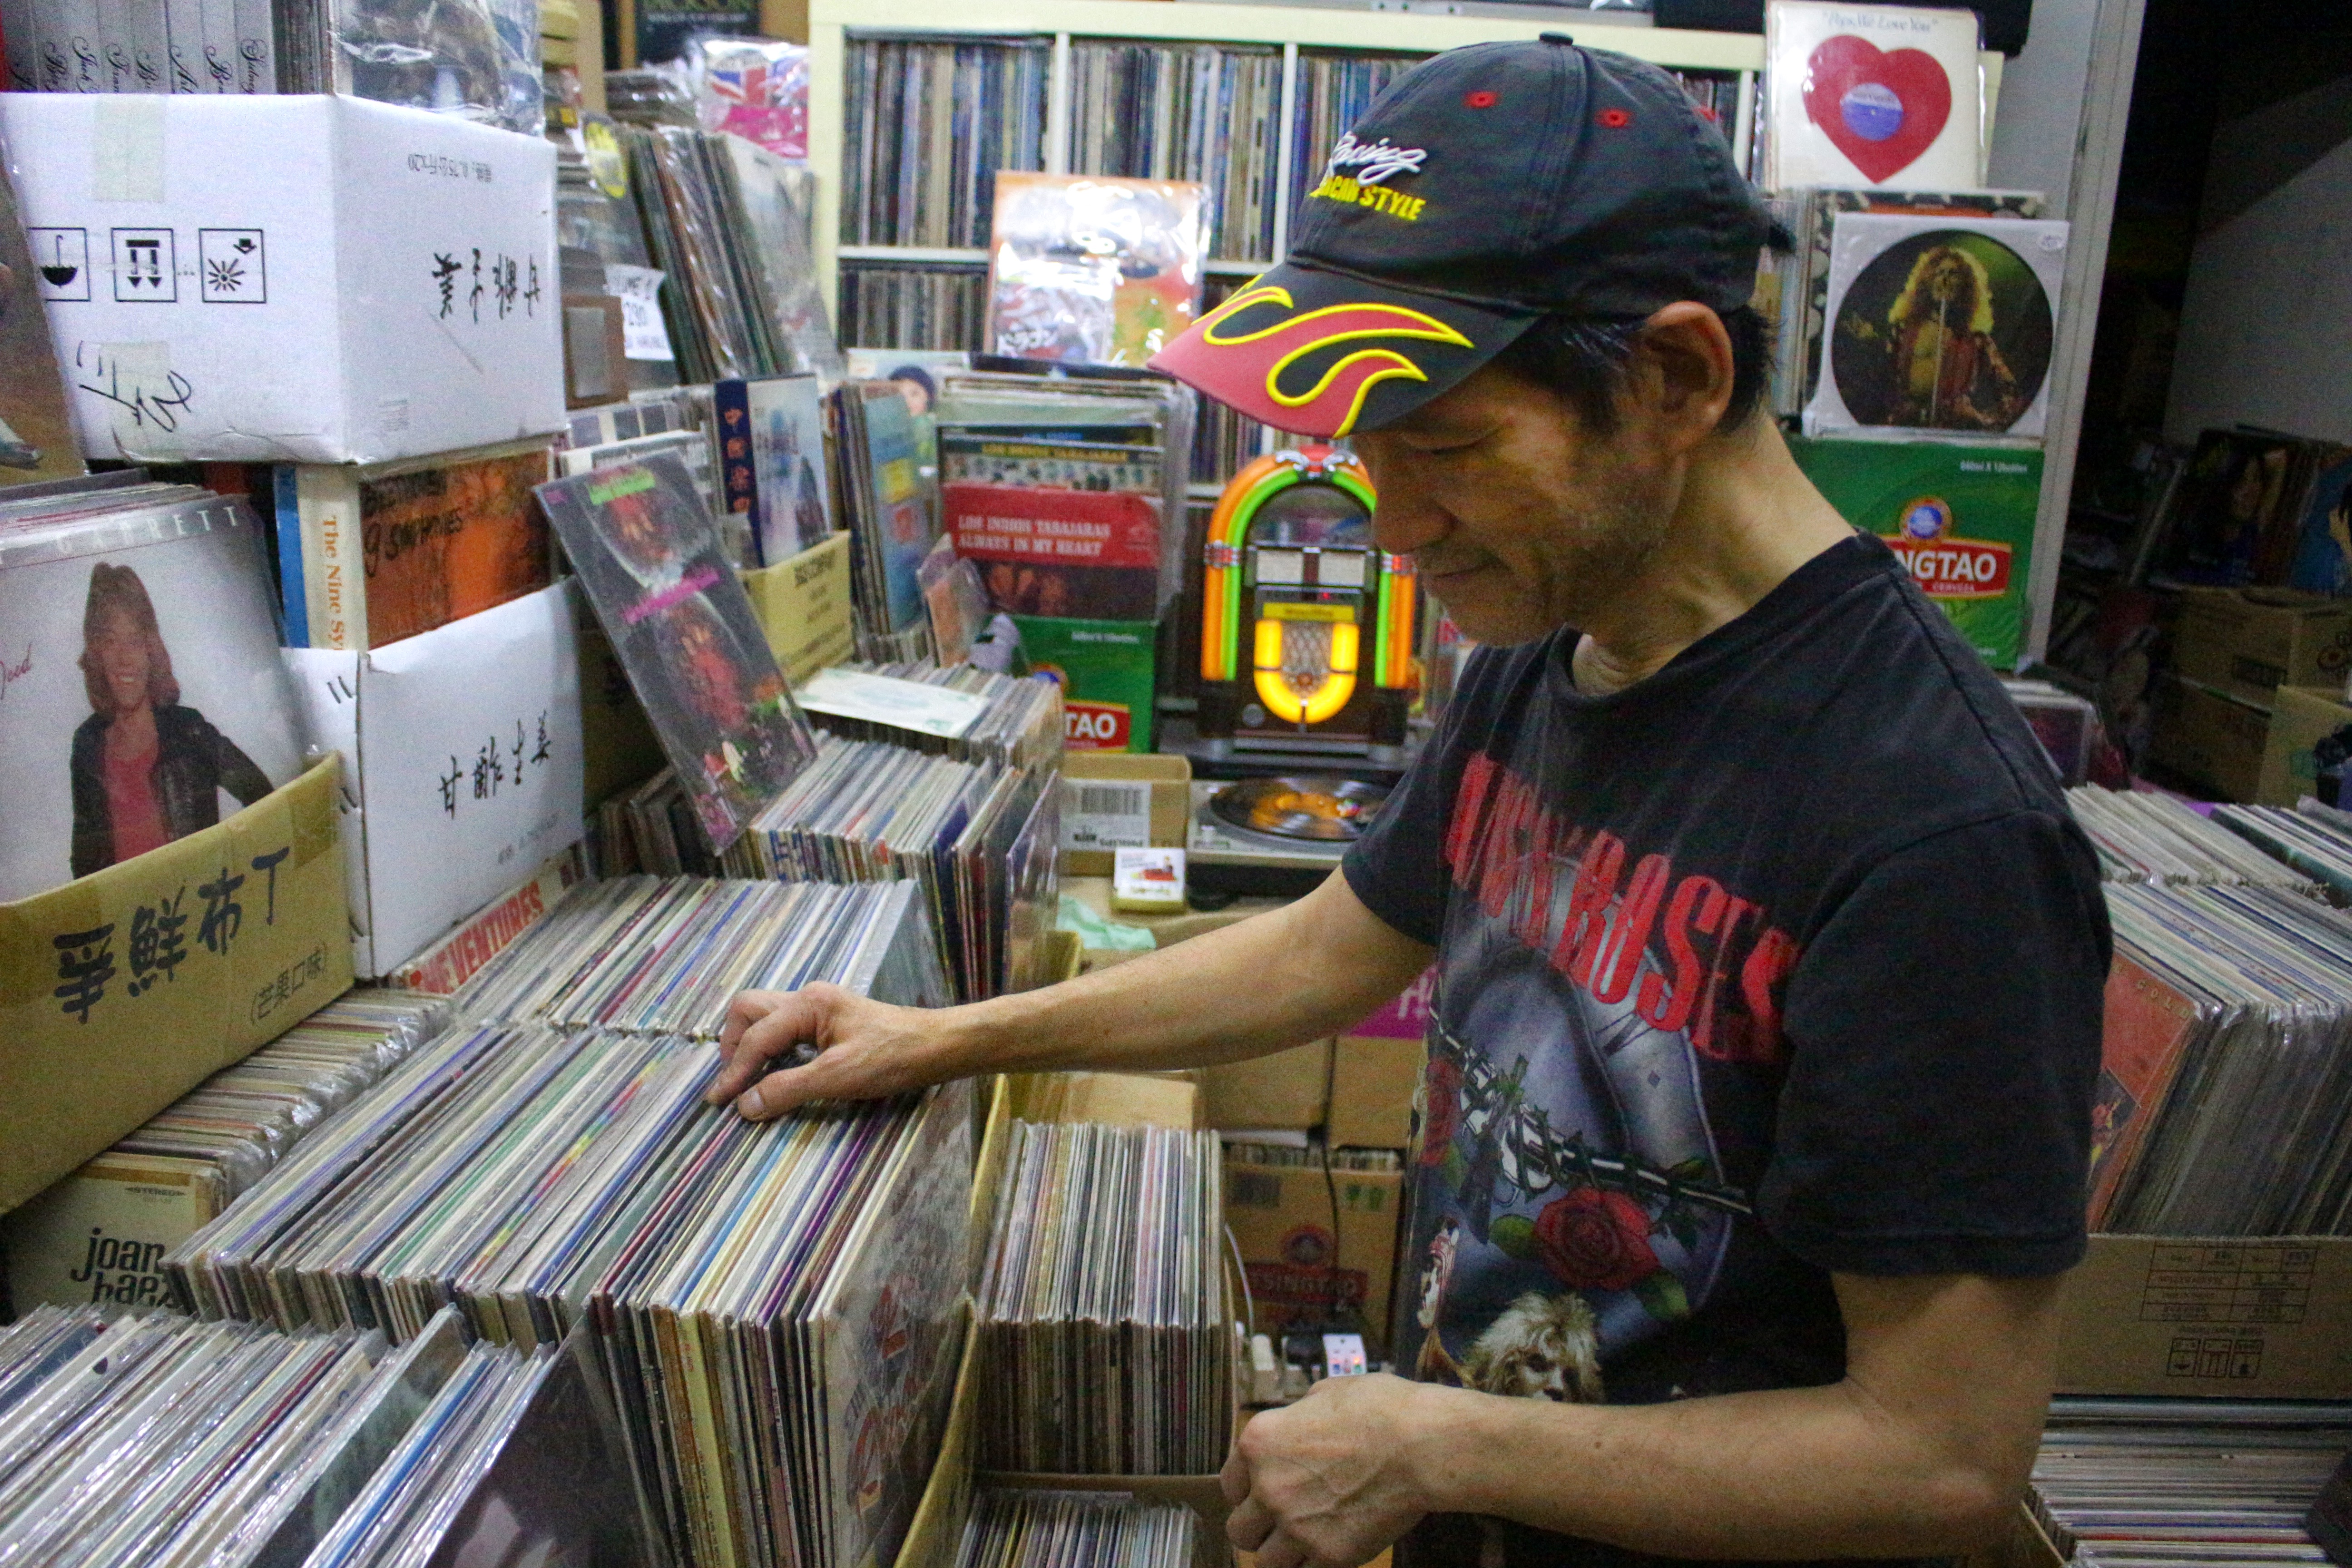 Paul Au, the self-proclaimed vinyl hero of Hong Kong, browsing through his vinyl collection. Photo by Vicky Wong.